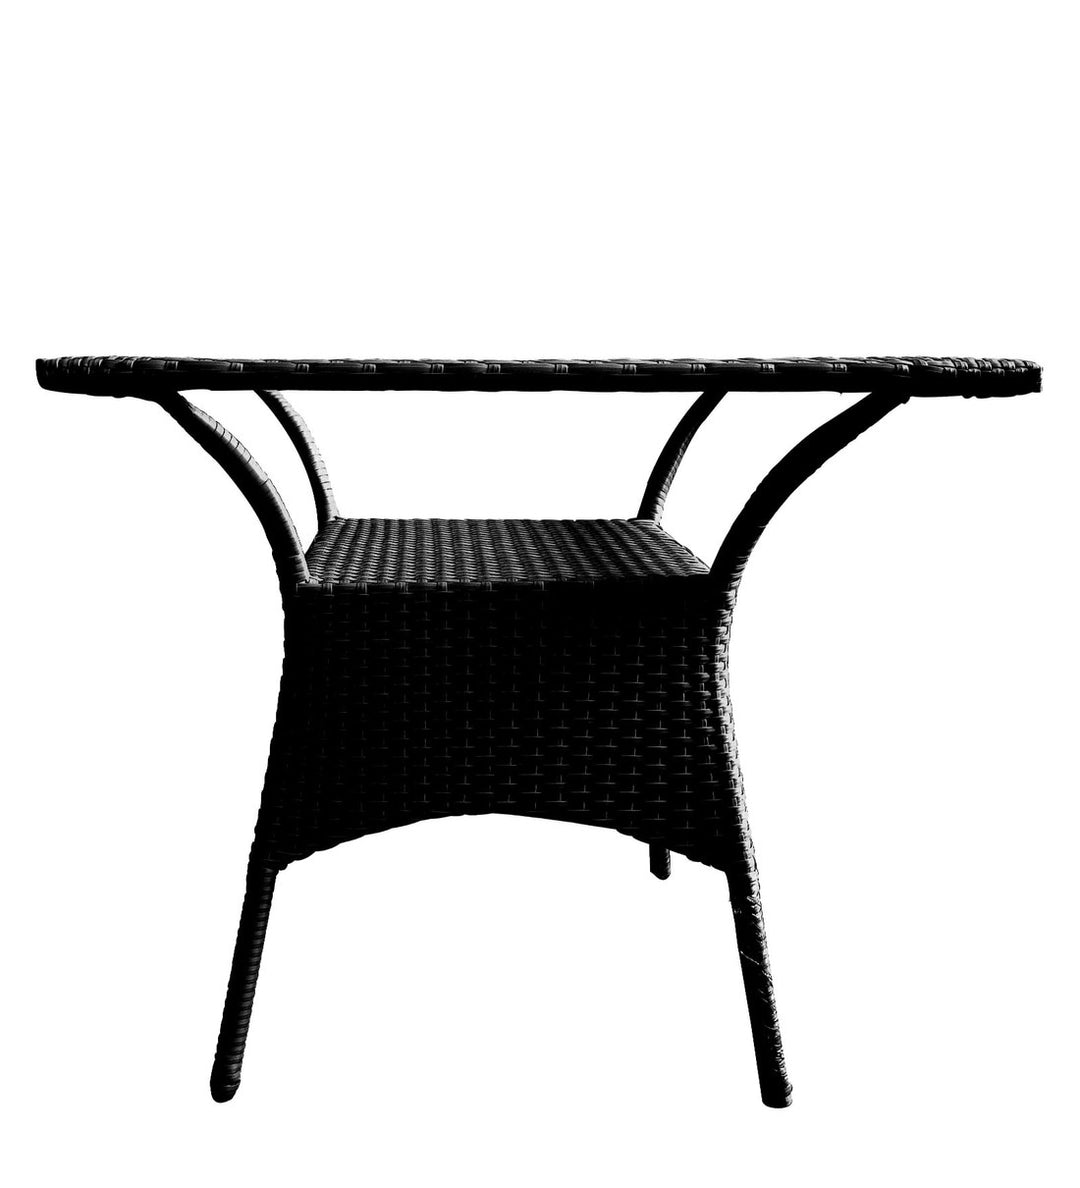 Dreamline Outdoor Furniture Garden Patio Seating Set 1+4 4 Chairs and Table Set Balcony Furniture Coffee Table Set (Black)